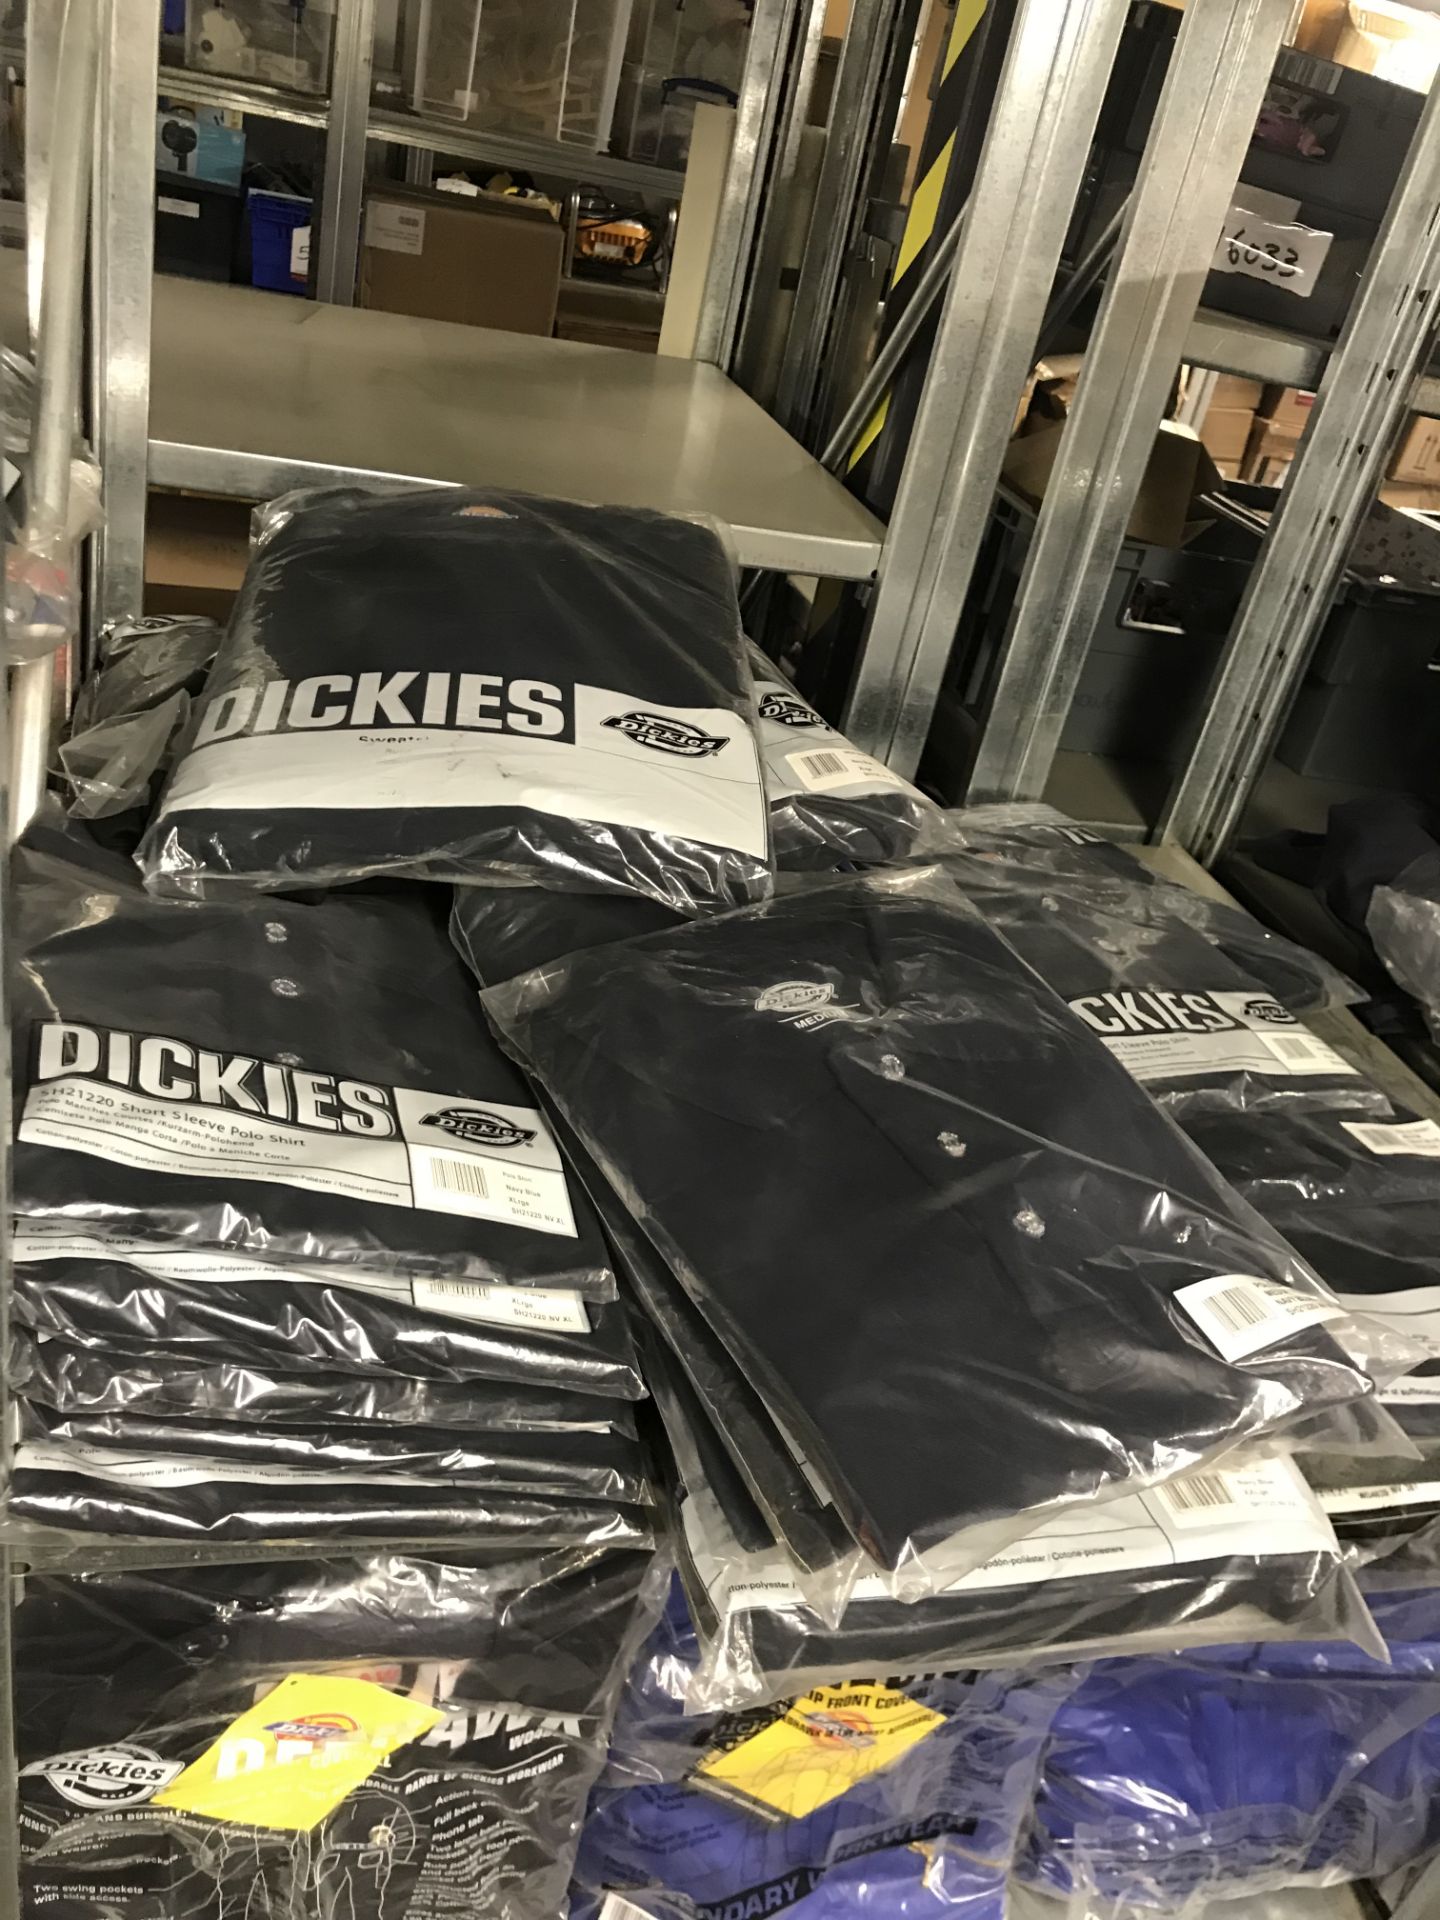 80 x Dickies Polo Shirts, T-shirts & Sweaters - Various Sizes - Colours inc: Navy & Royal Blue - Image 2 of 3